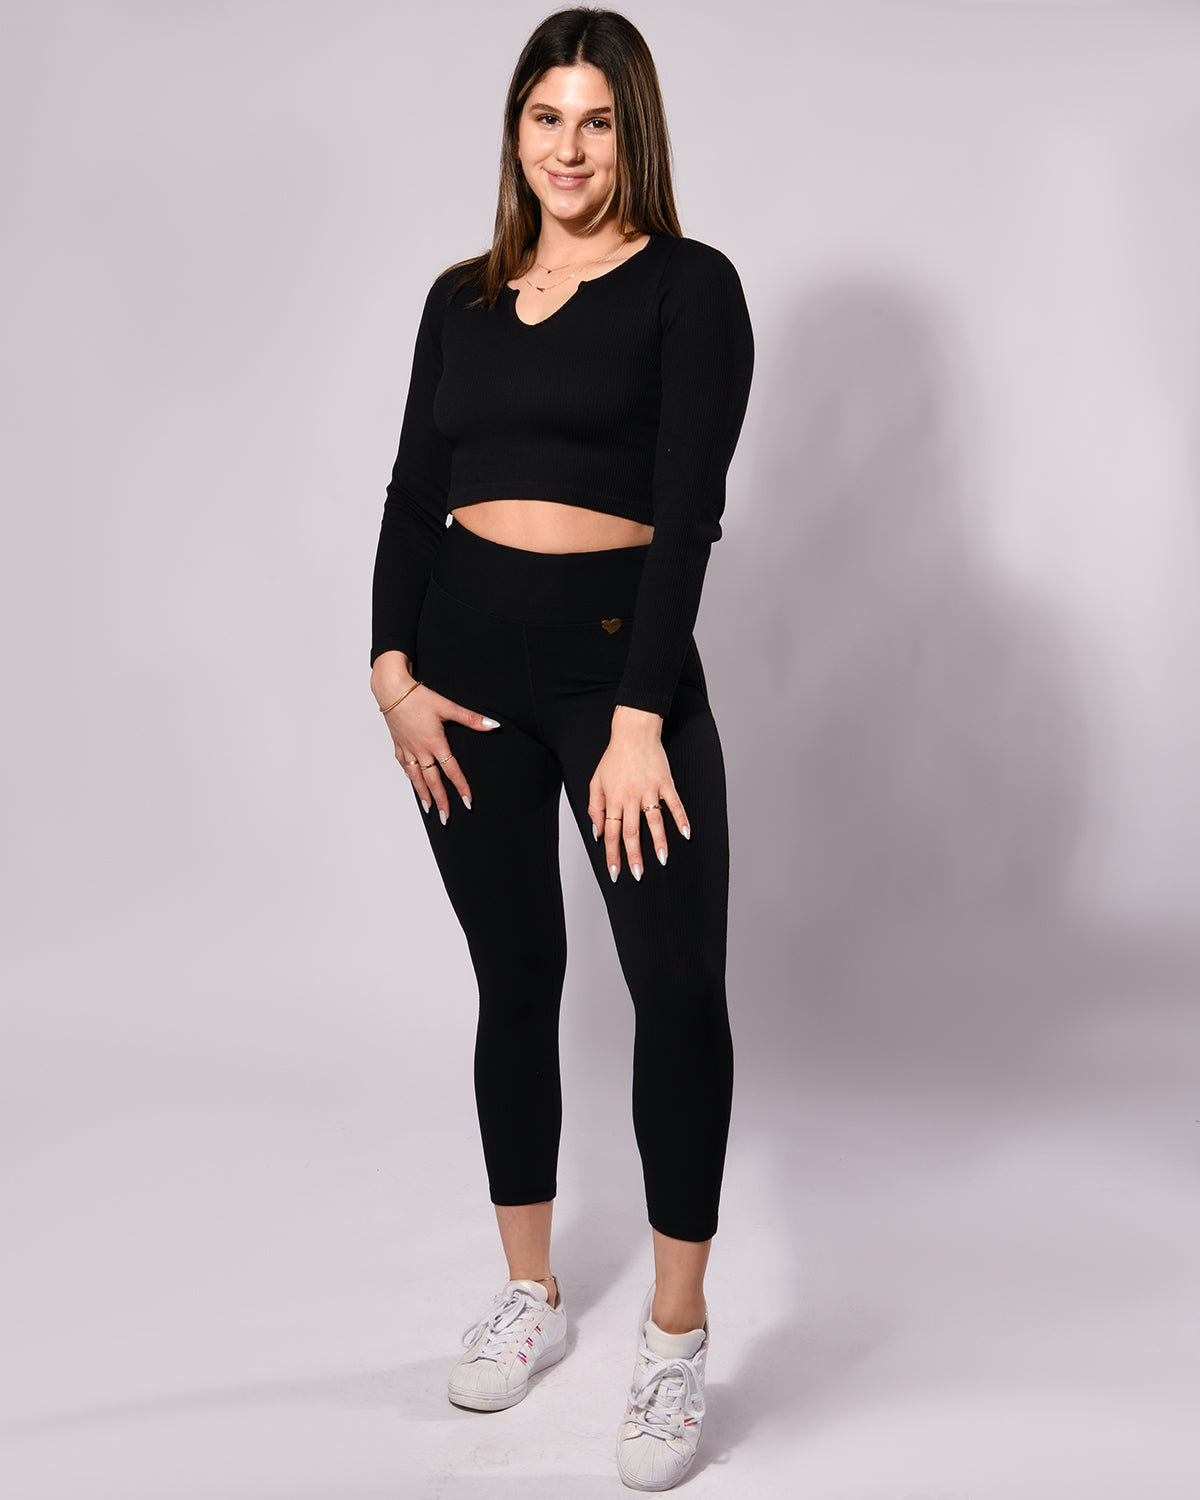 *Get it Together* (Rib High Waist Leggings) by Cute Booty Lounge